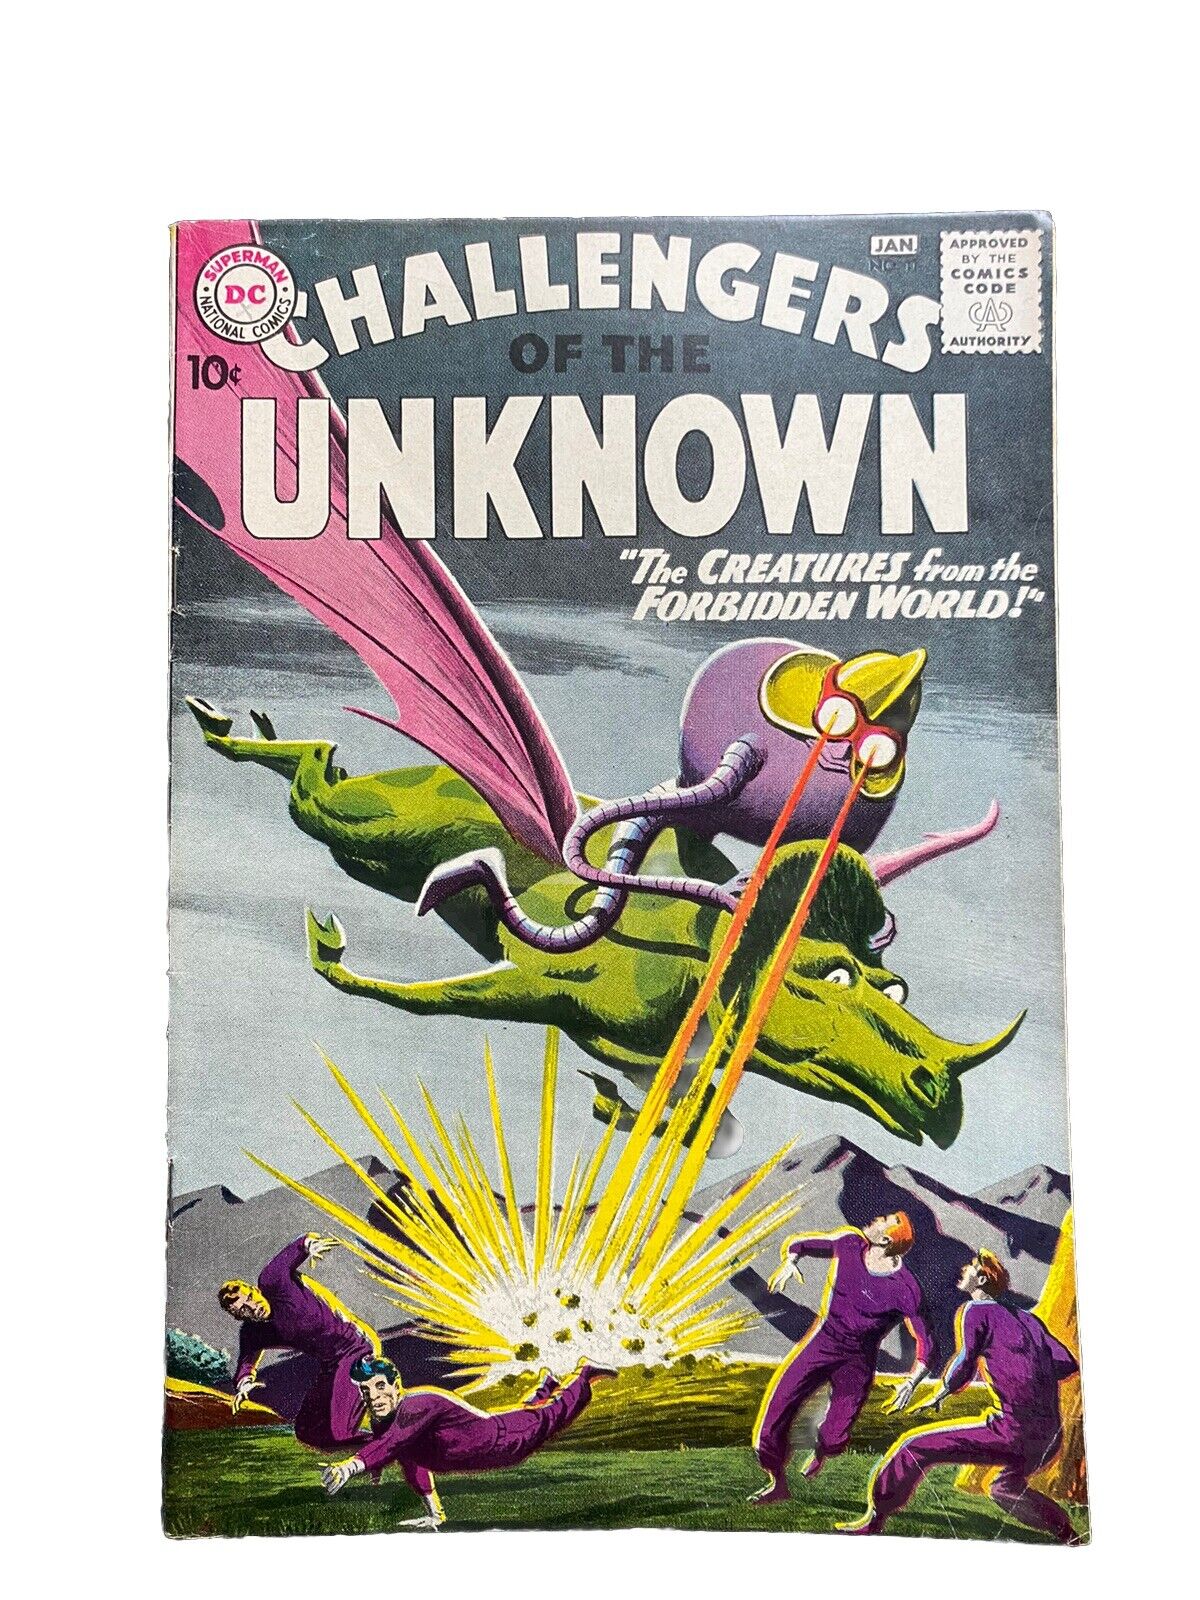 Challengers Of The Unknown #11 (Dec, 1959)